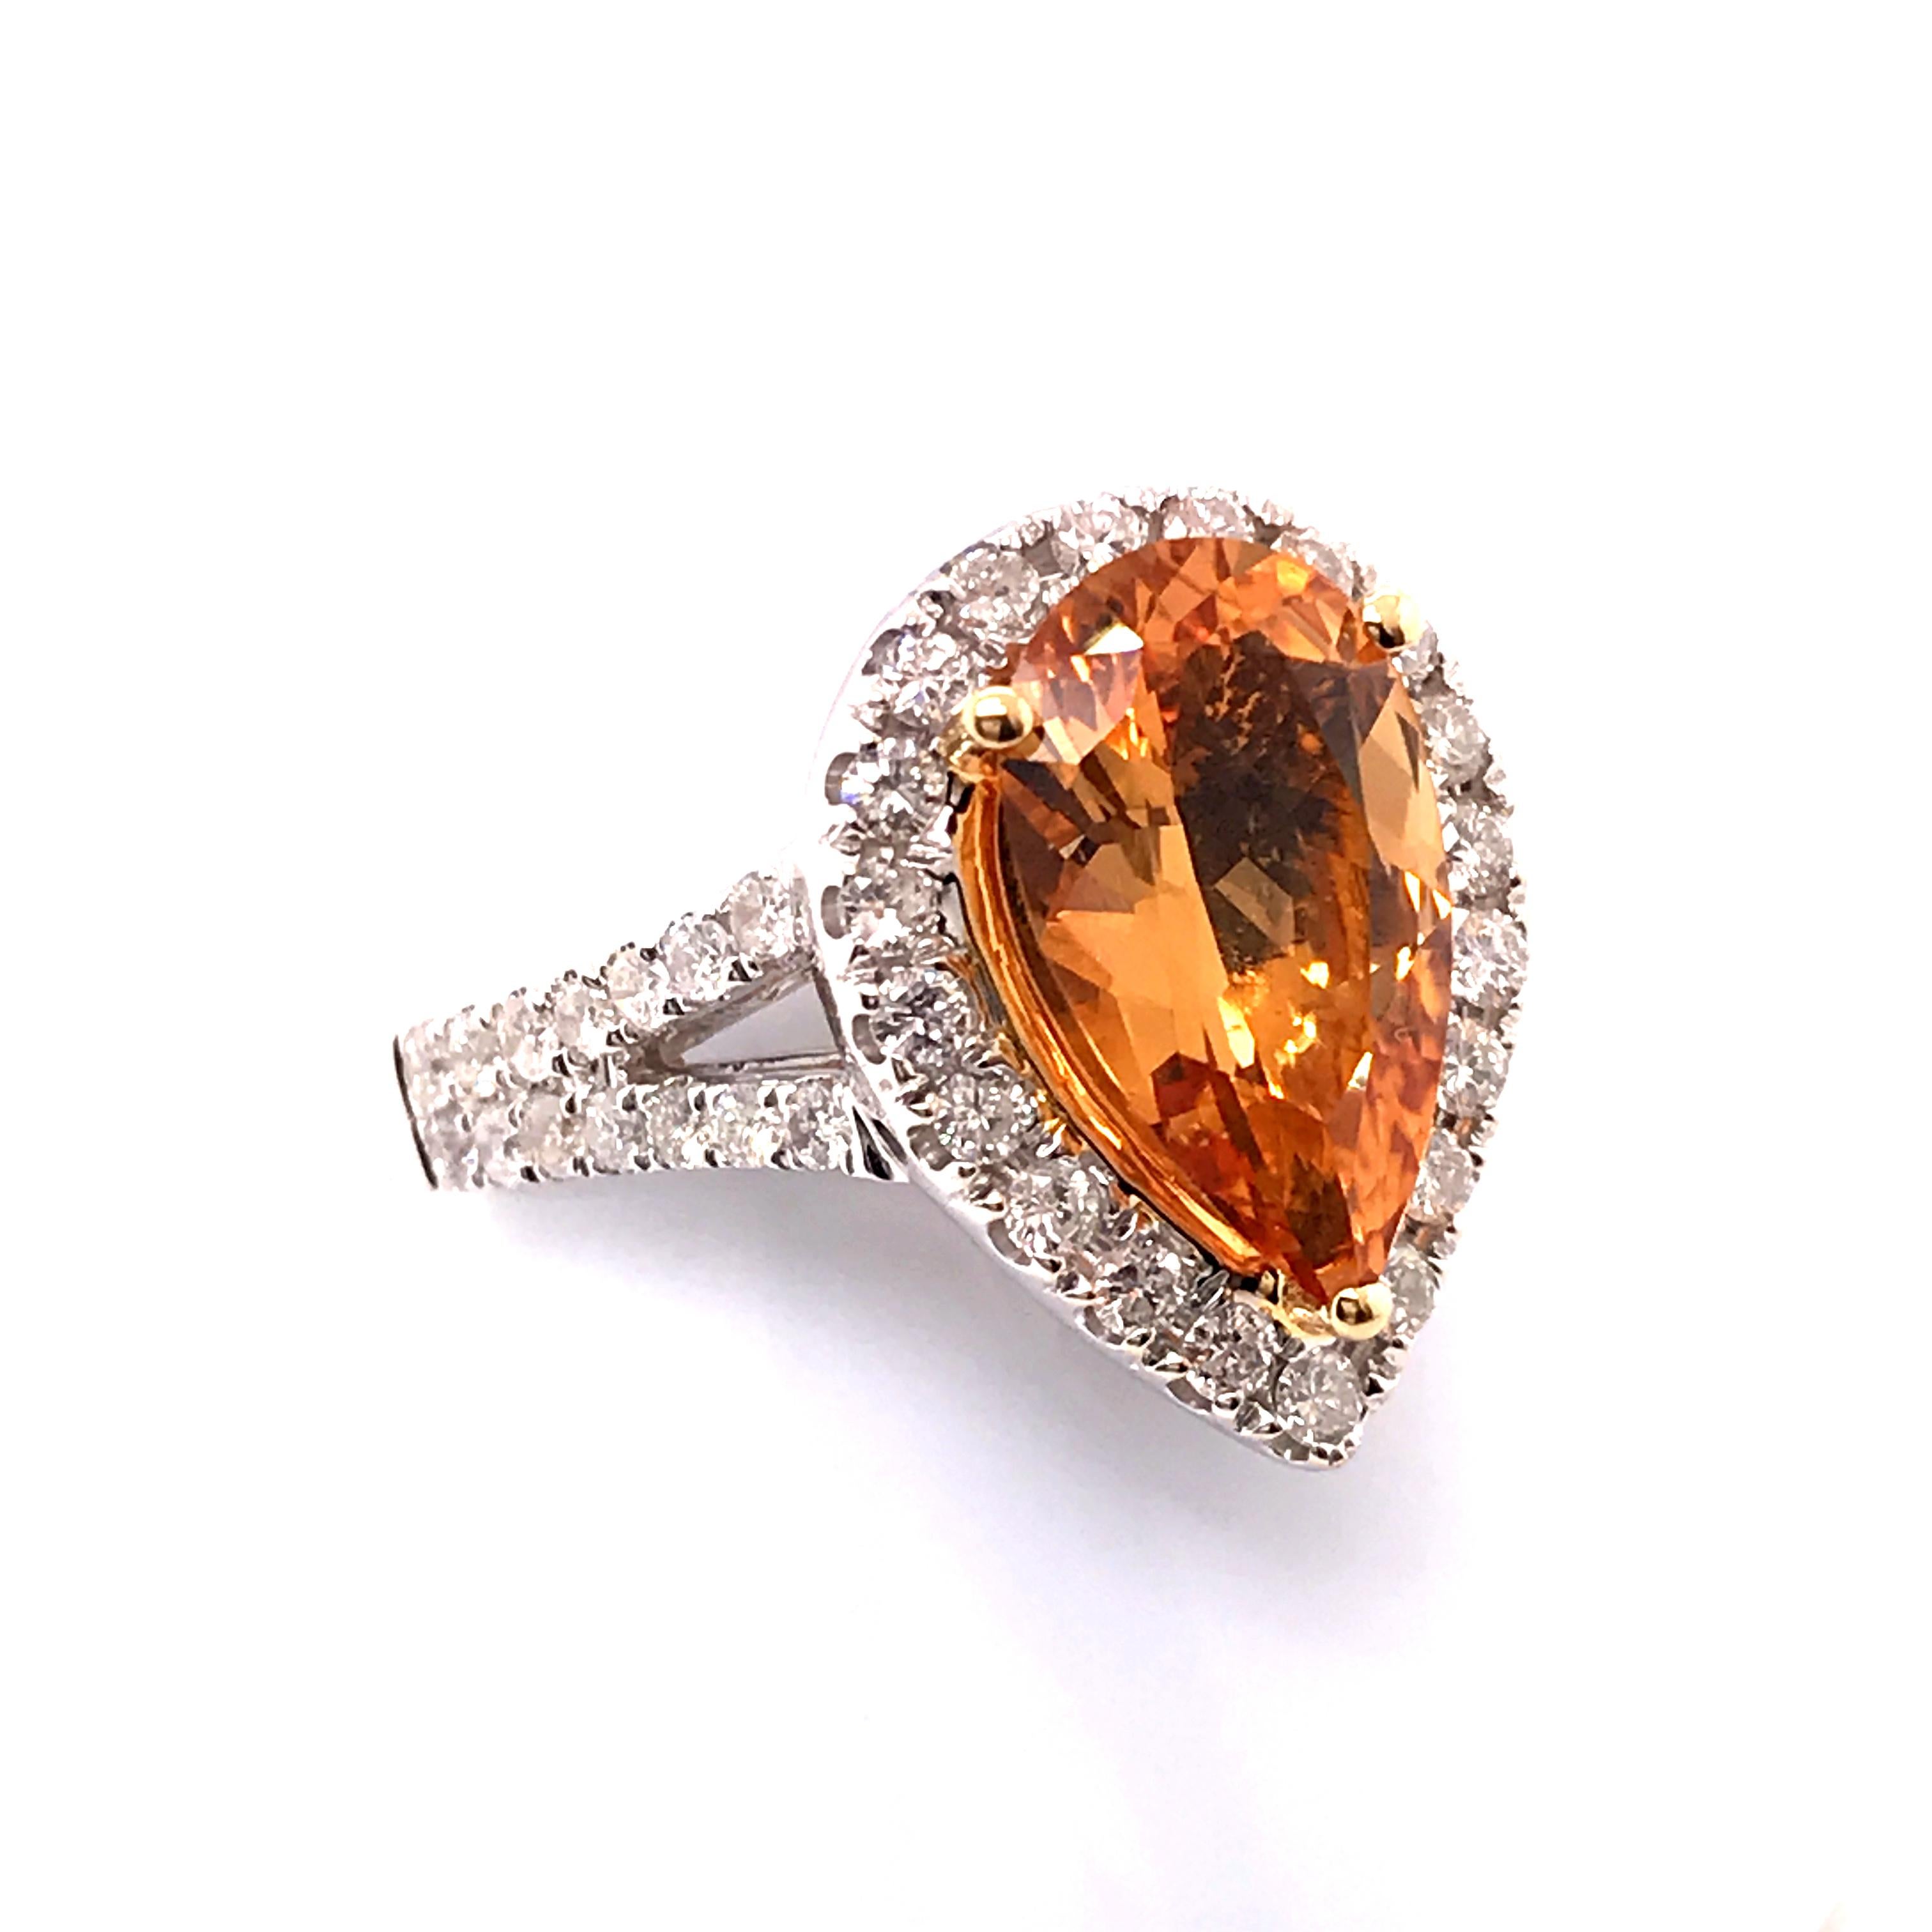 This is an 18-karat two-tone gold ring mostly white gold with a yellow gold basket and prongs. The split shank has round diamonds that balance out the pear shape center stone perfectly which is surrounded by additional round diamonds. In total, the